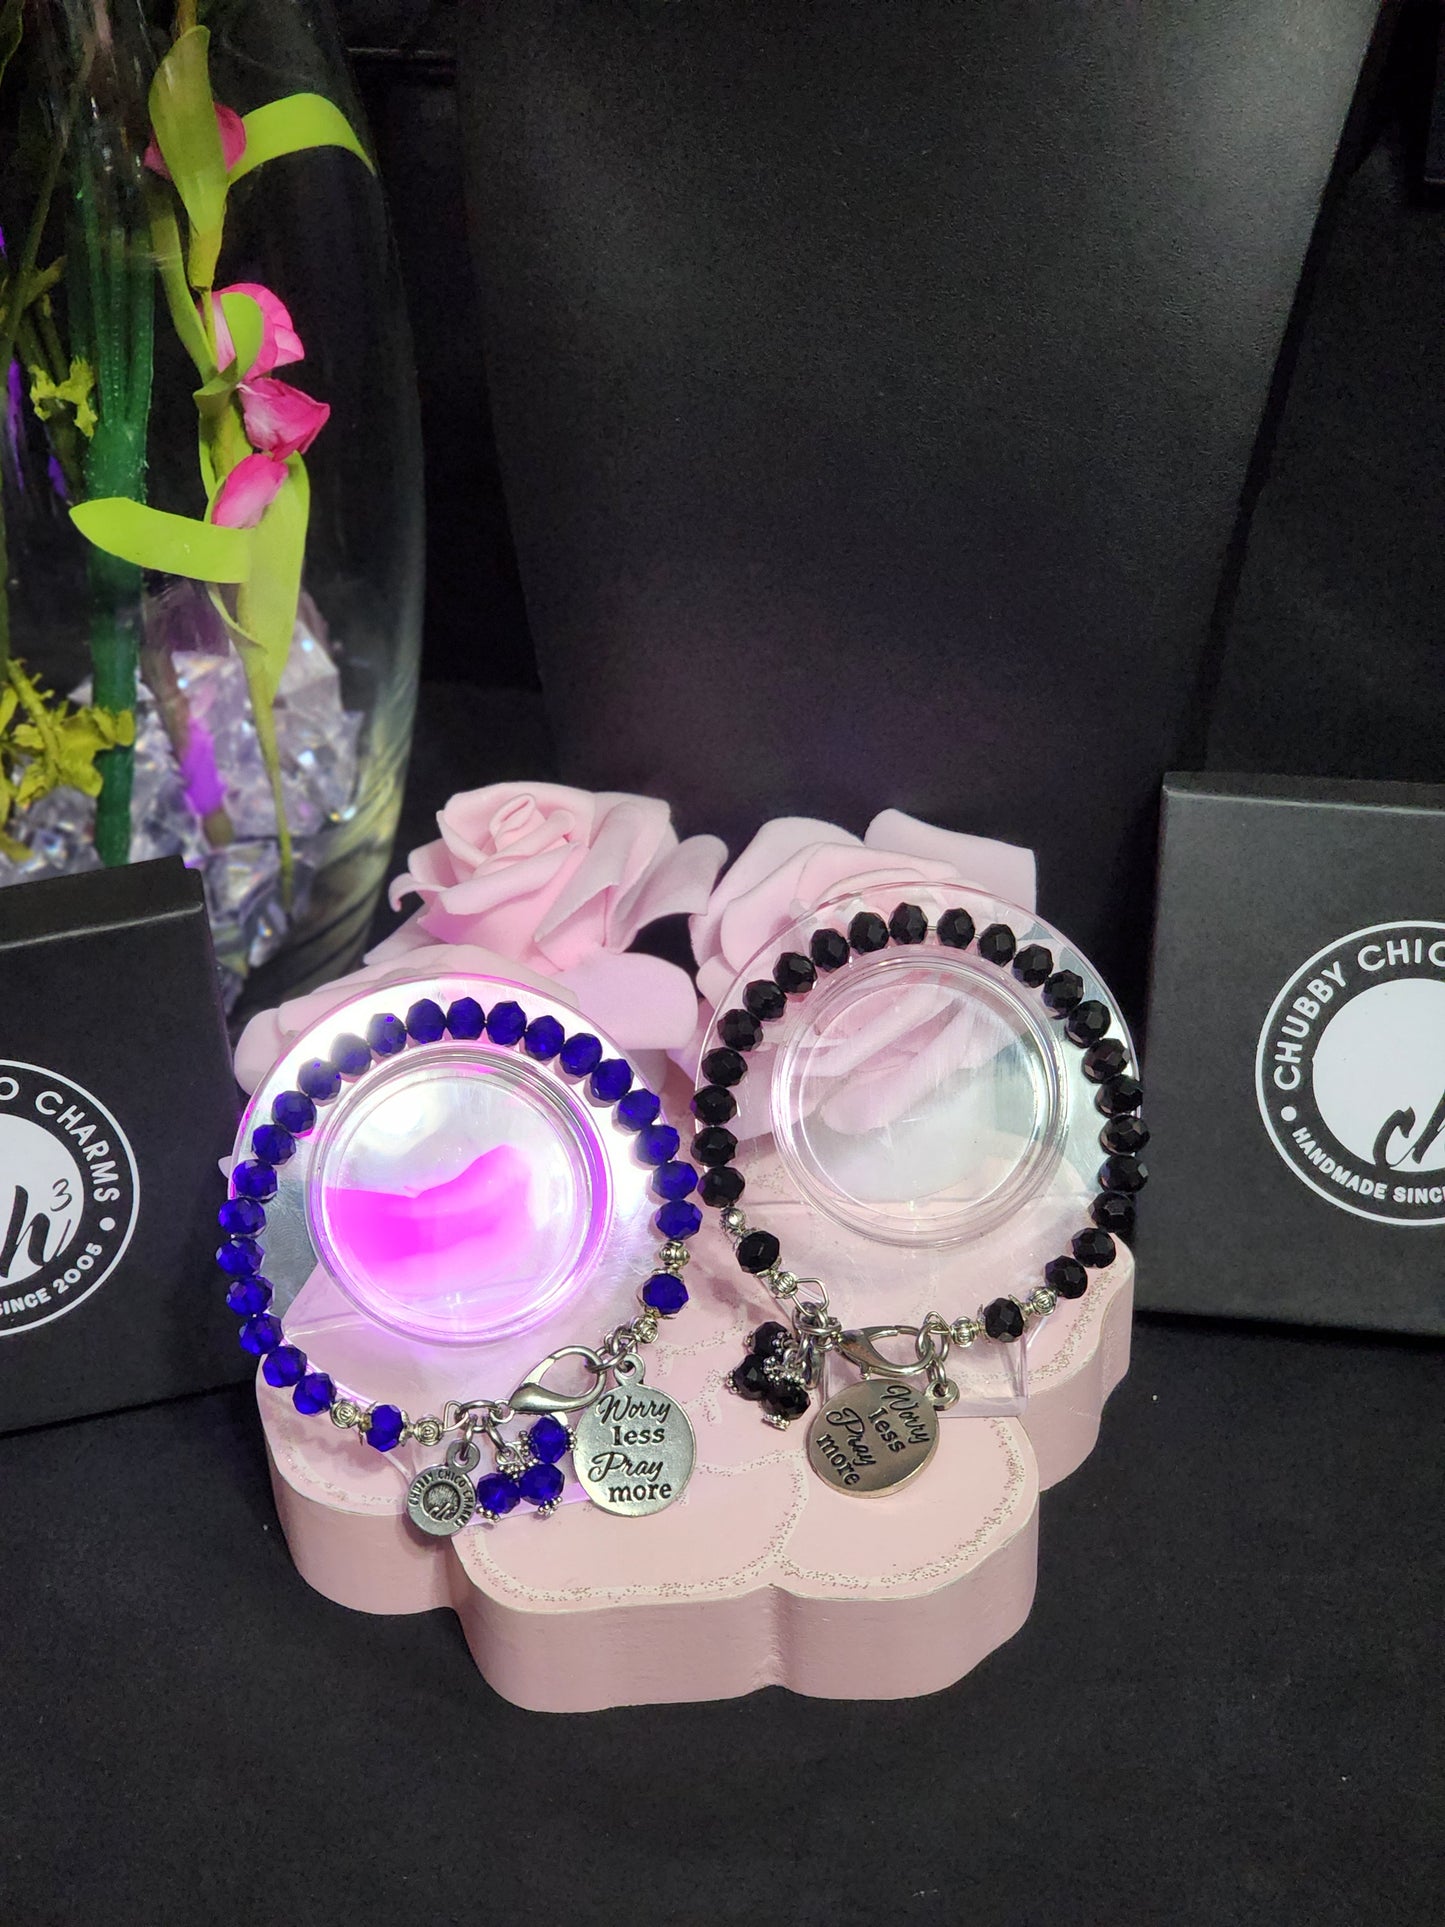 Worry Less Pray More Splash Of Color Crystal Bracelet - Electric Purple or Black  (Chubby Chico Charms Company)